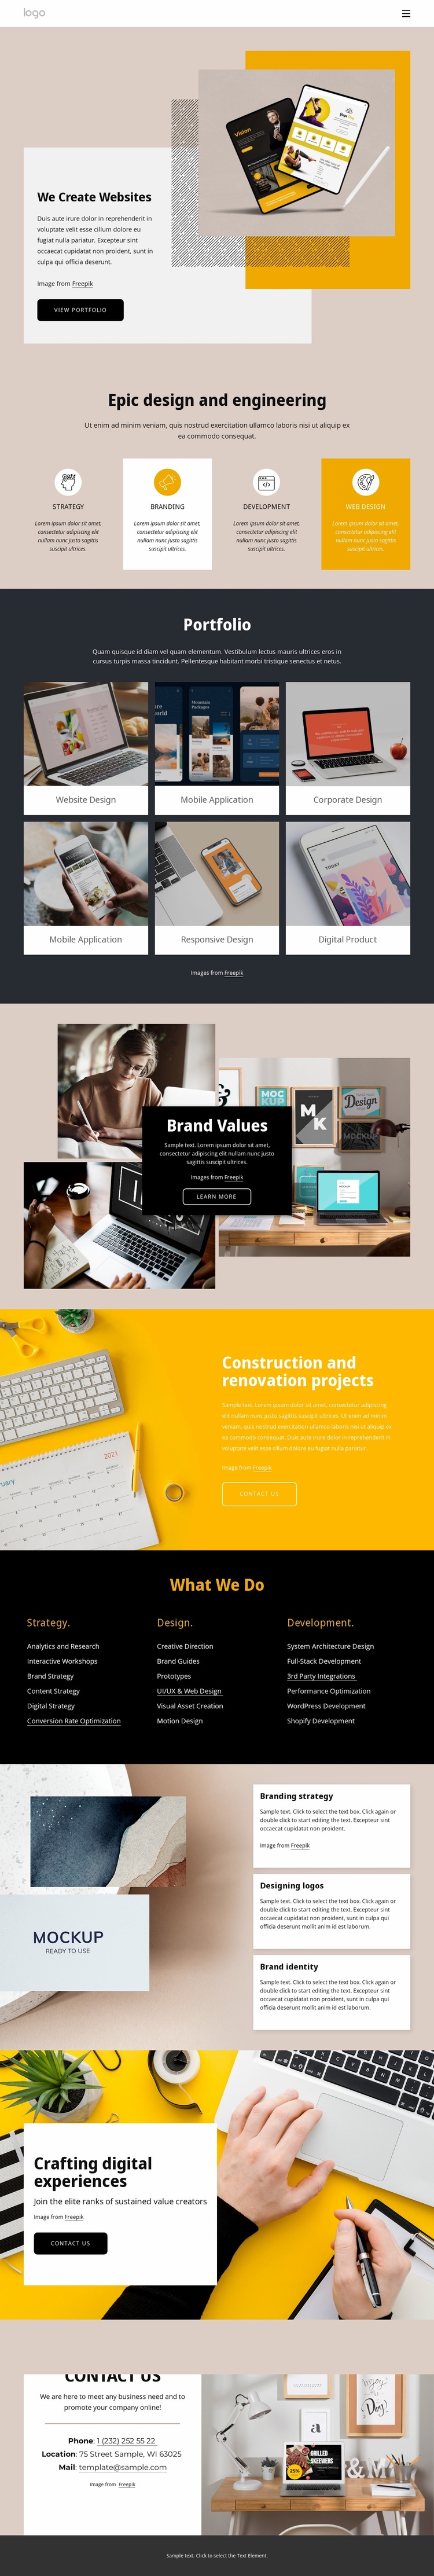 Professional web design and design eCommerce Template